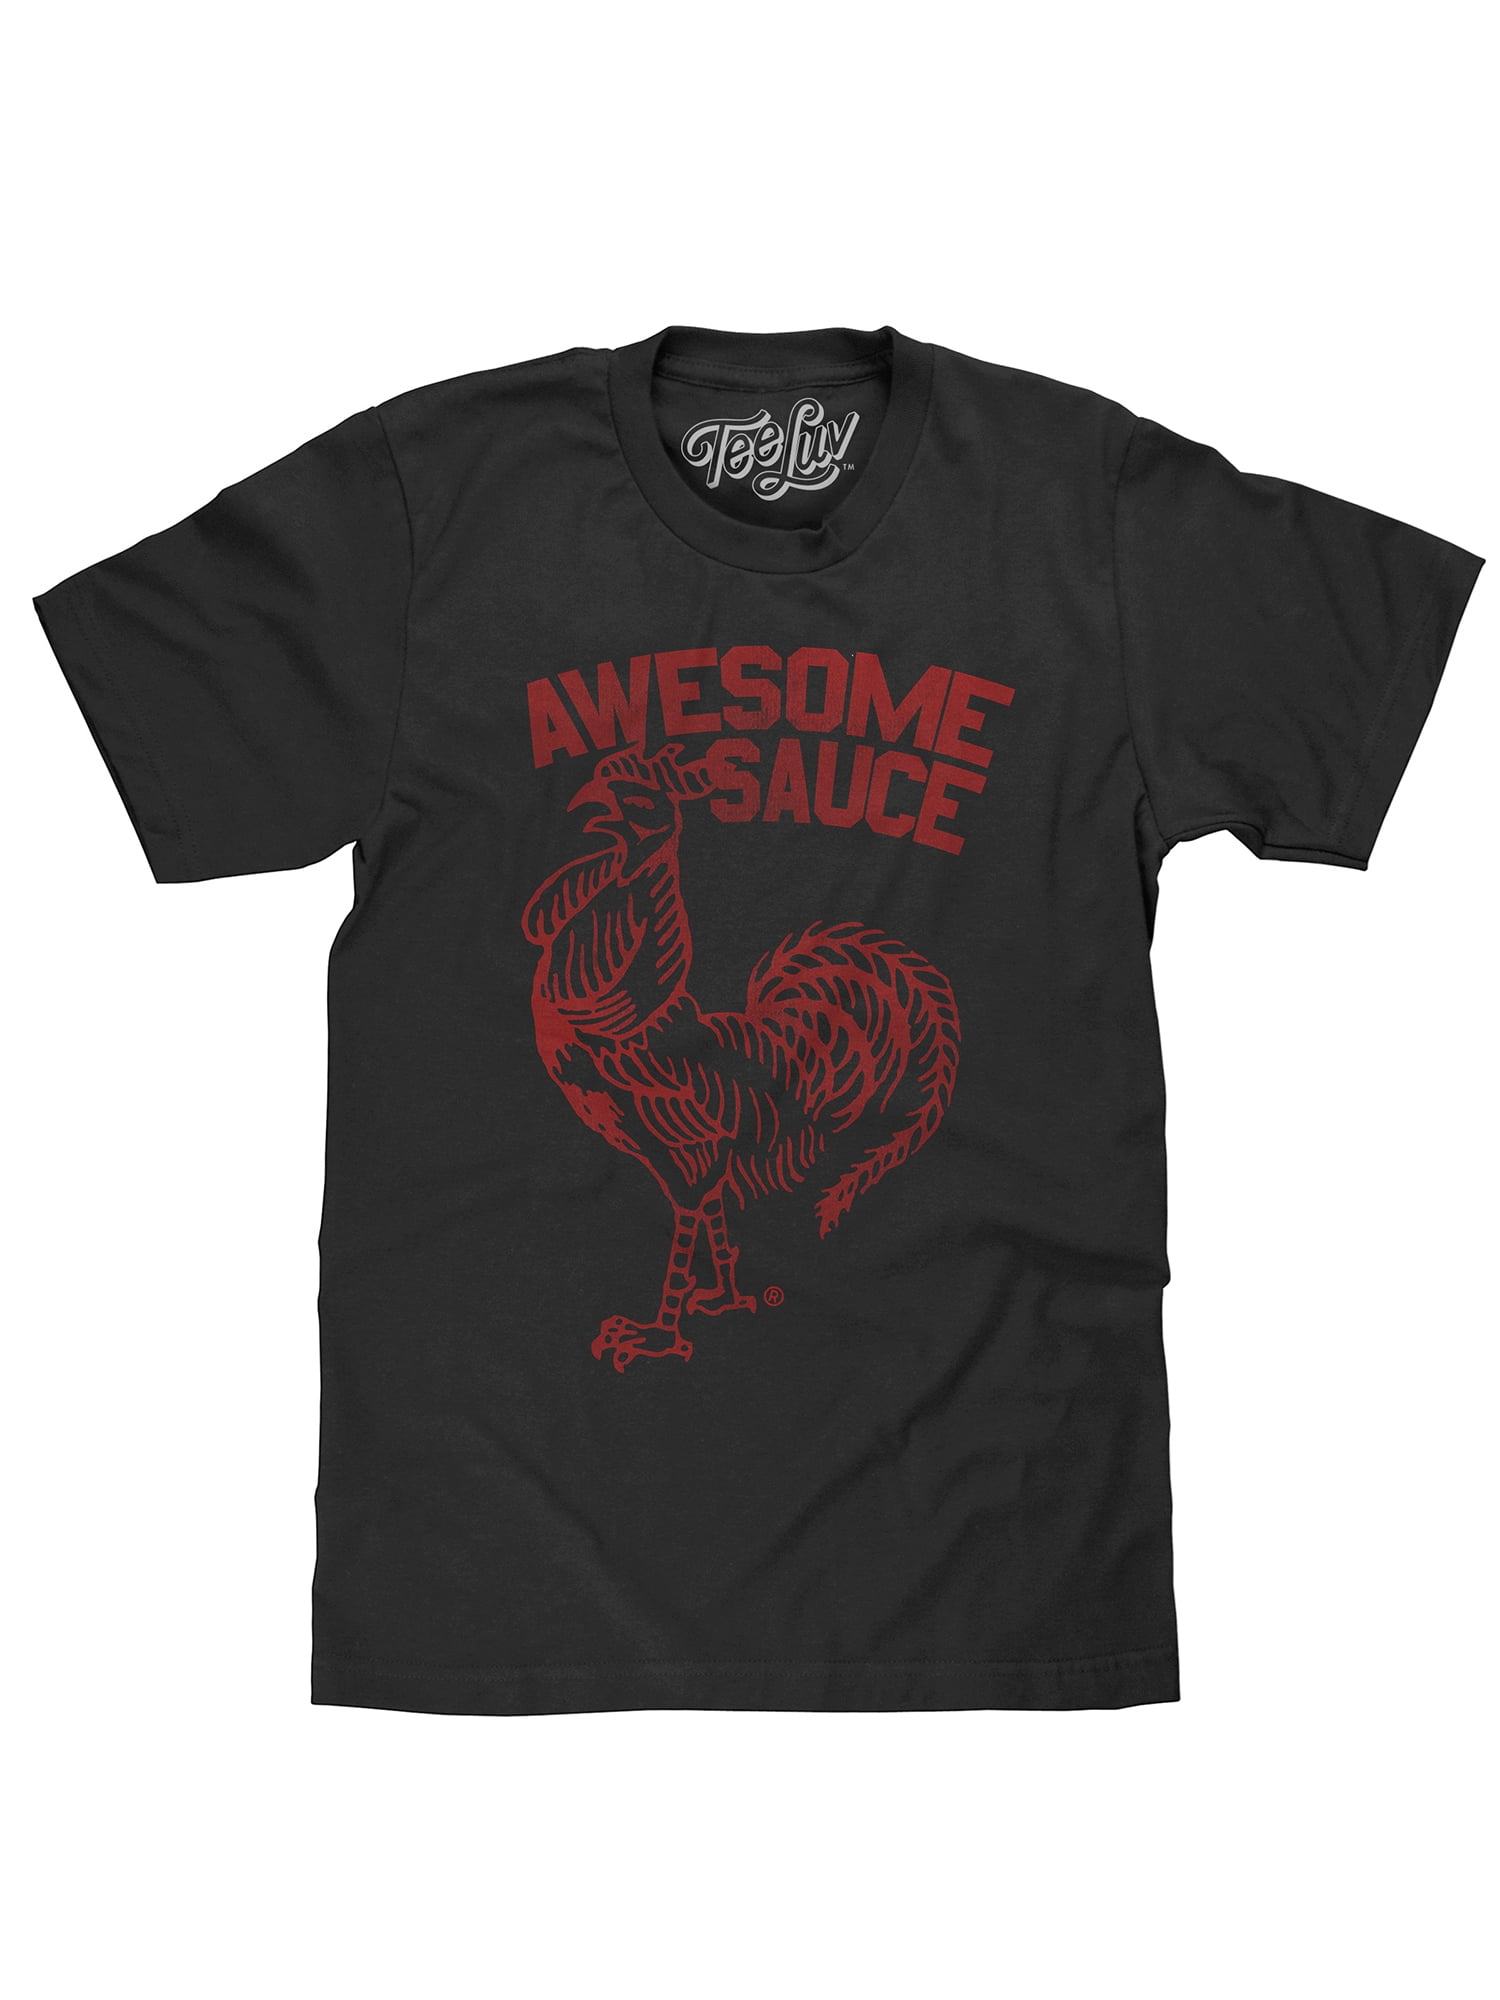 Tee Luv Men's Faded Sriracha Awesome Sauce Rooster Logo Black Short ...